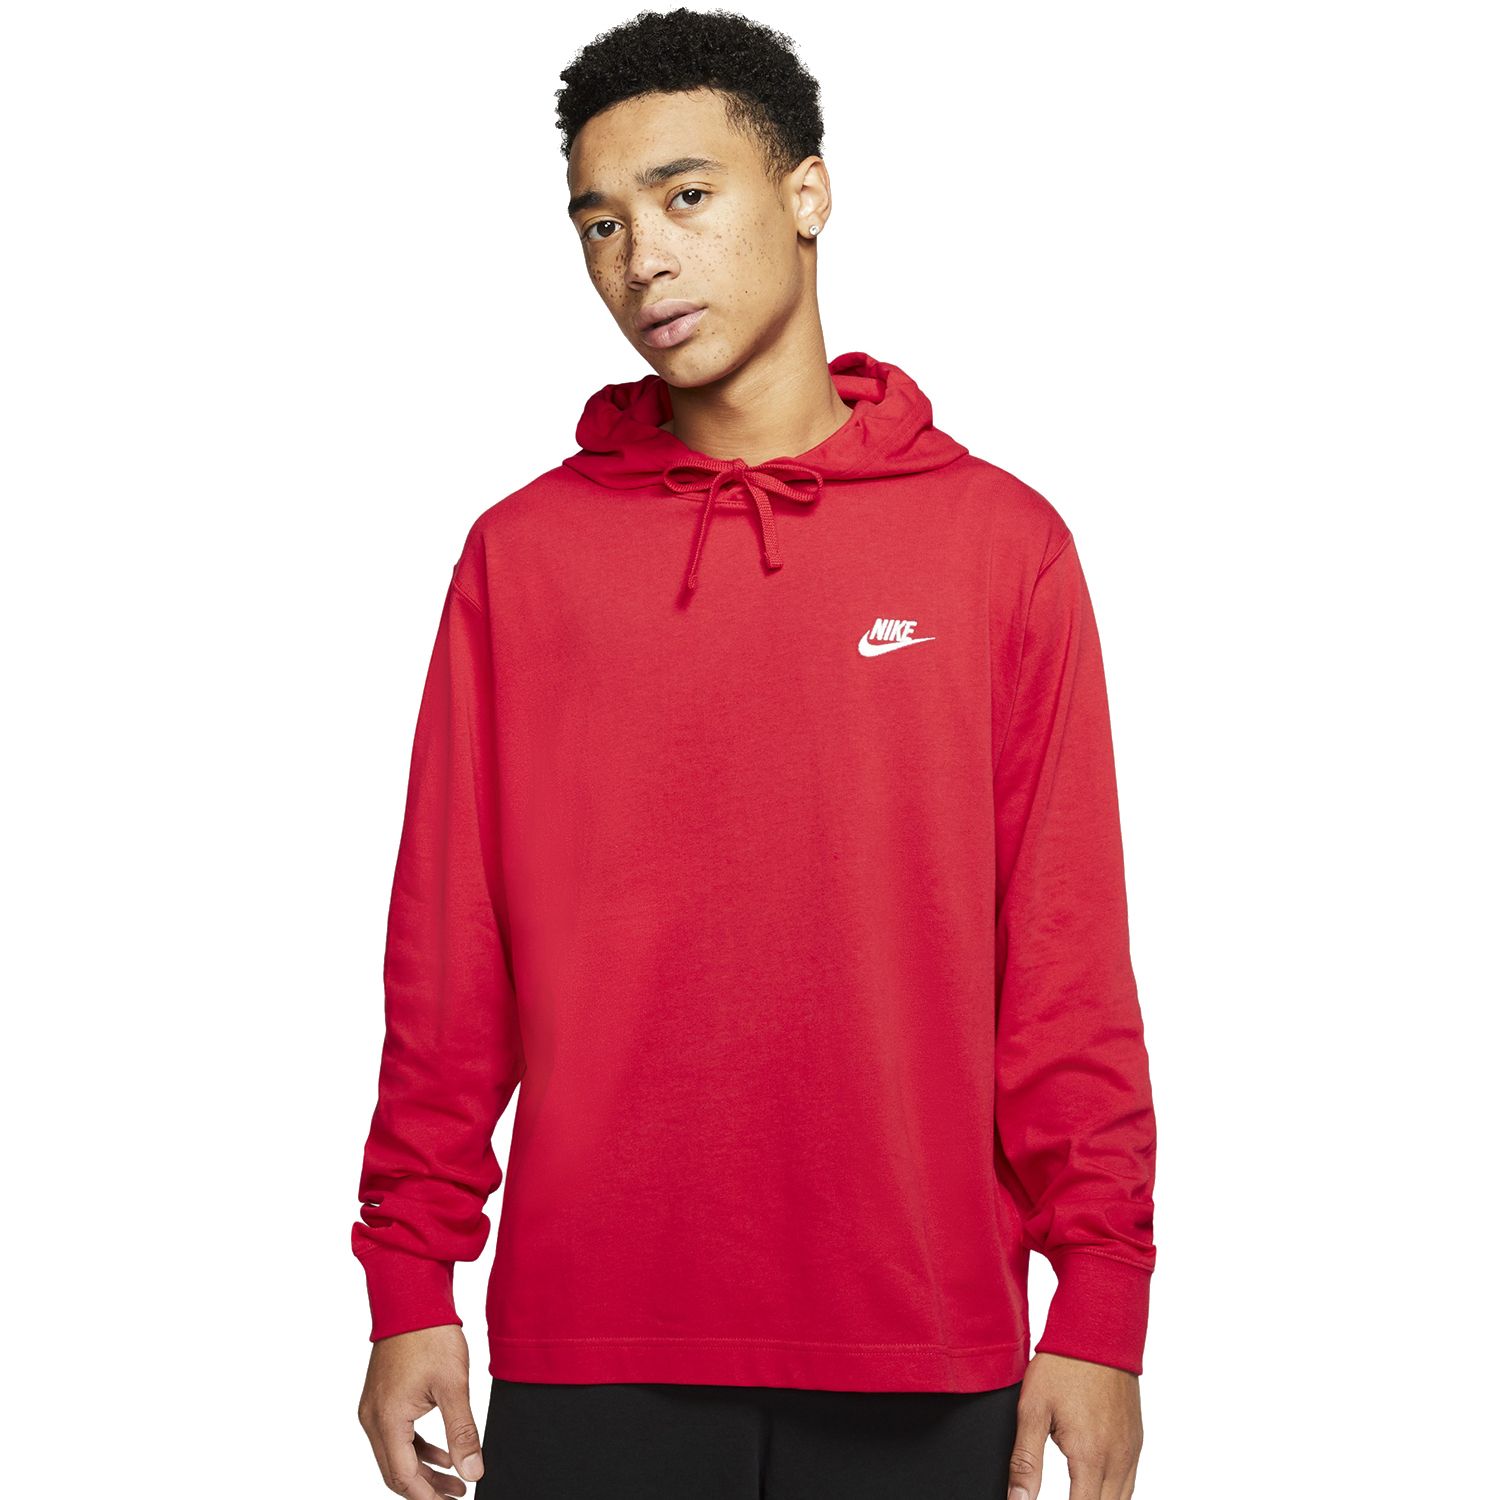 Nike Clearance Sale: Save on Discount 